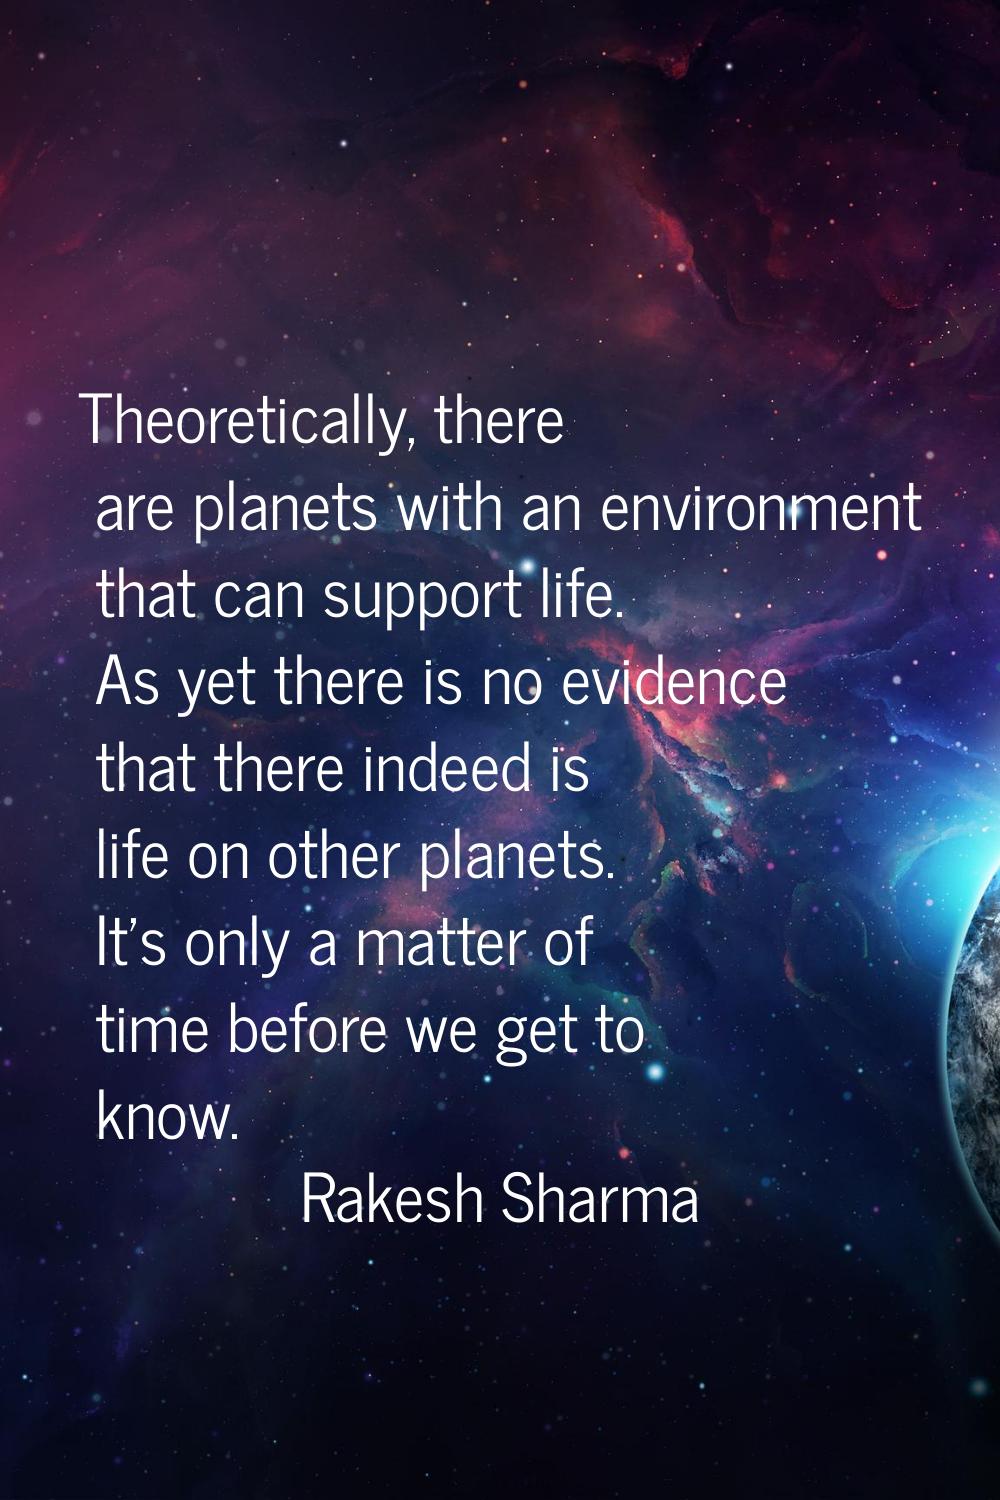 Theoretically, there are planets with an environment that can support life. As yet there is no evid